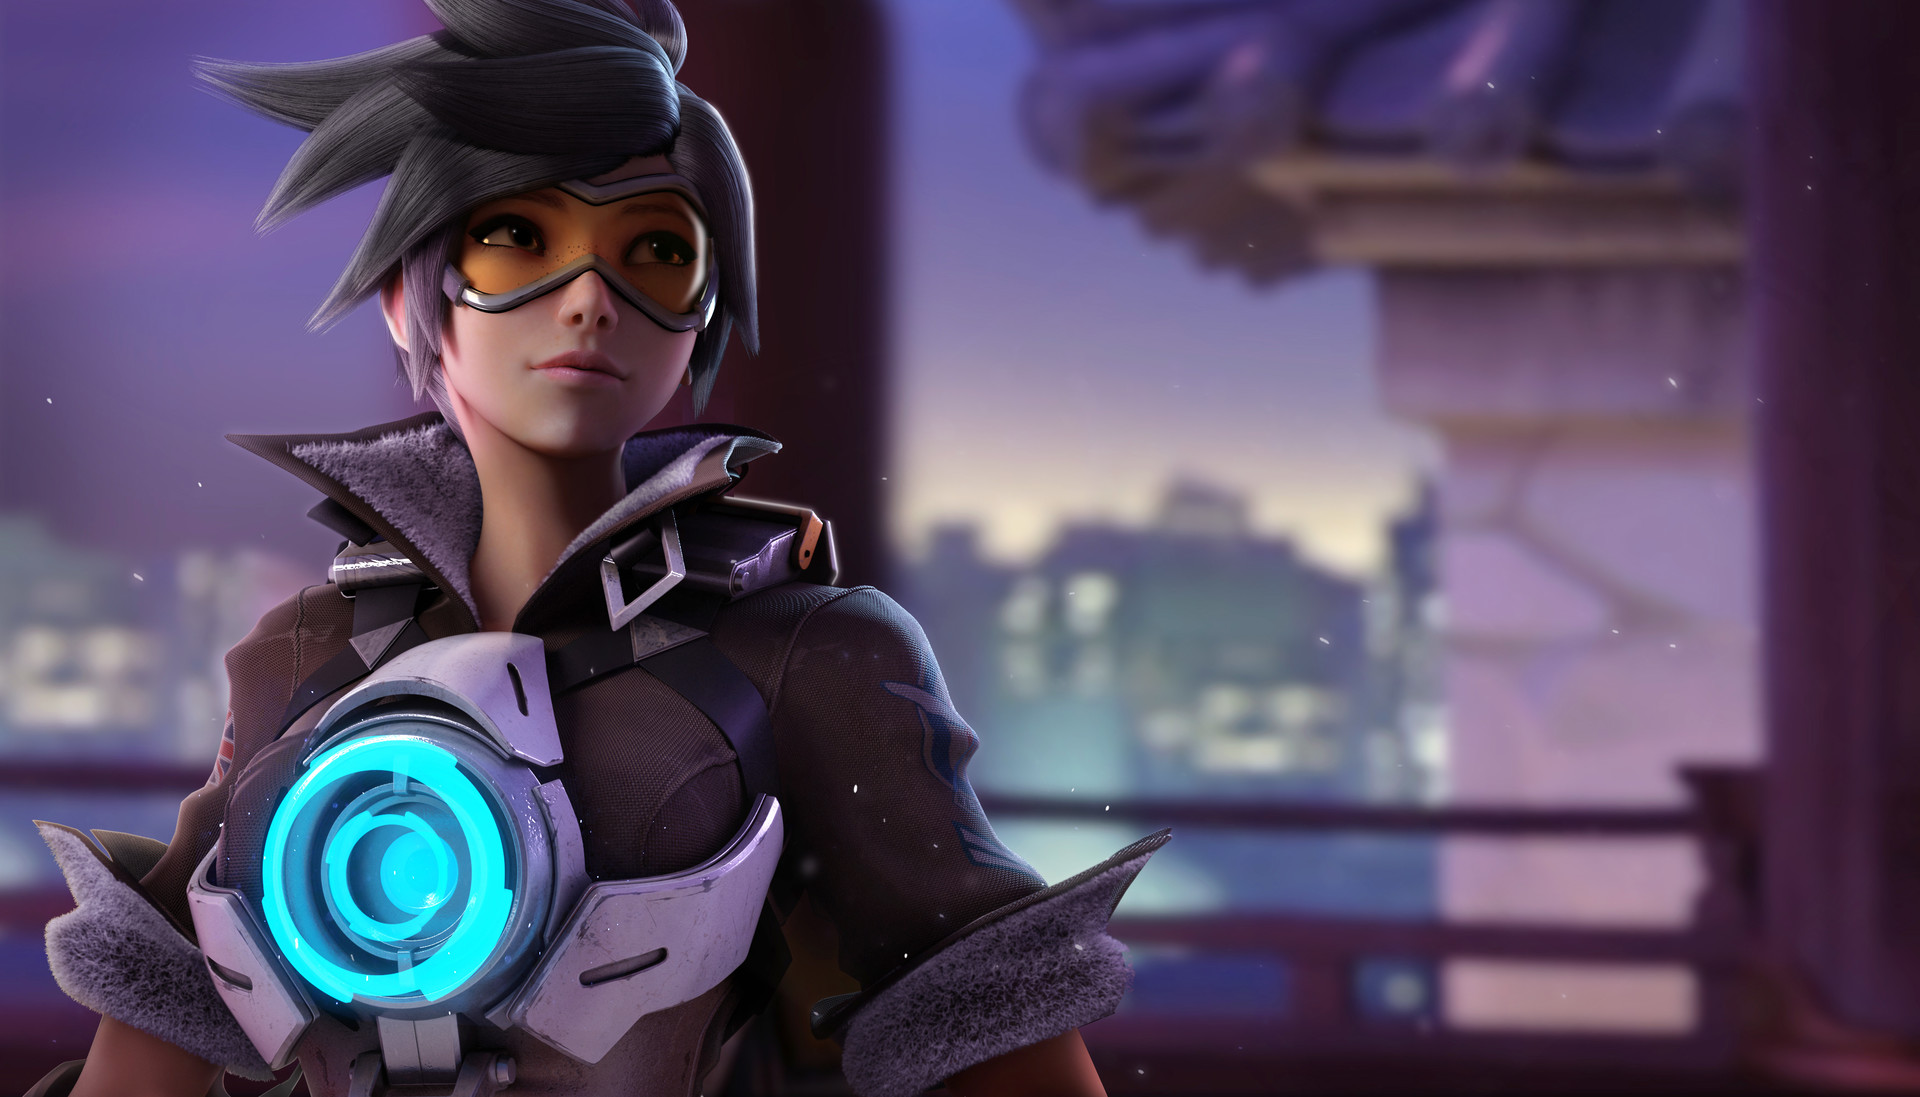 Tracer Overwatch Overwatch Skin Video Game Girls Video Game Characters 1920x1097